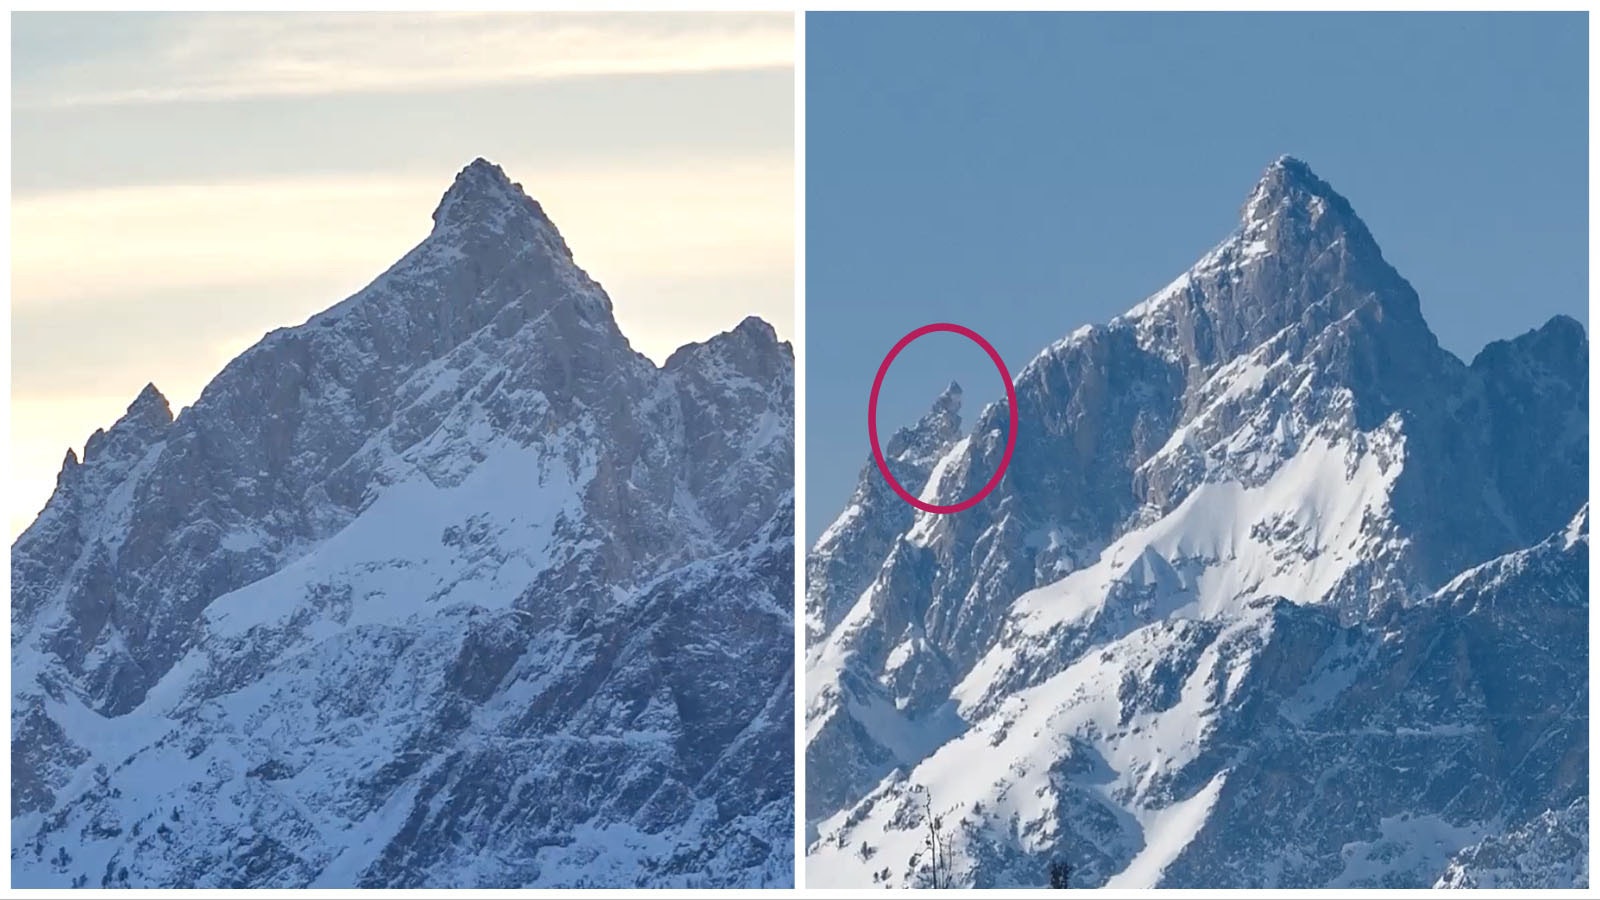 Seen side-by-side, it's apparent how a patch of rock in the Wyoming Tetons that broke off last fall changed the range's profile slightly.